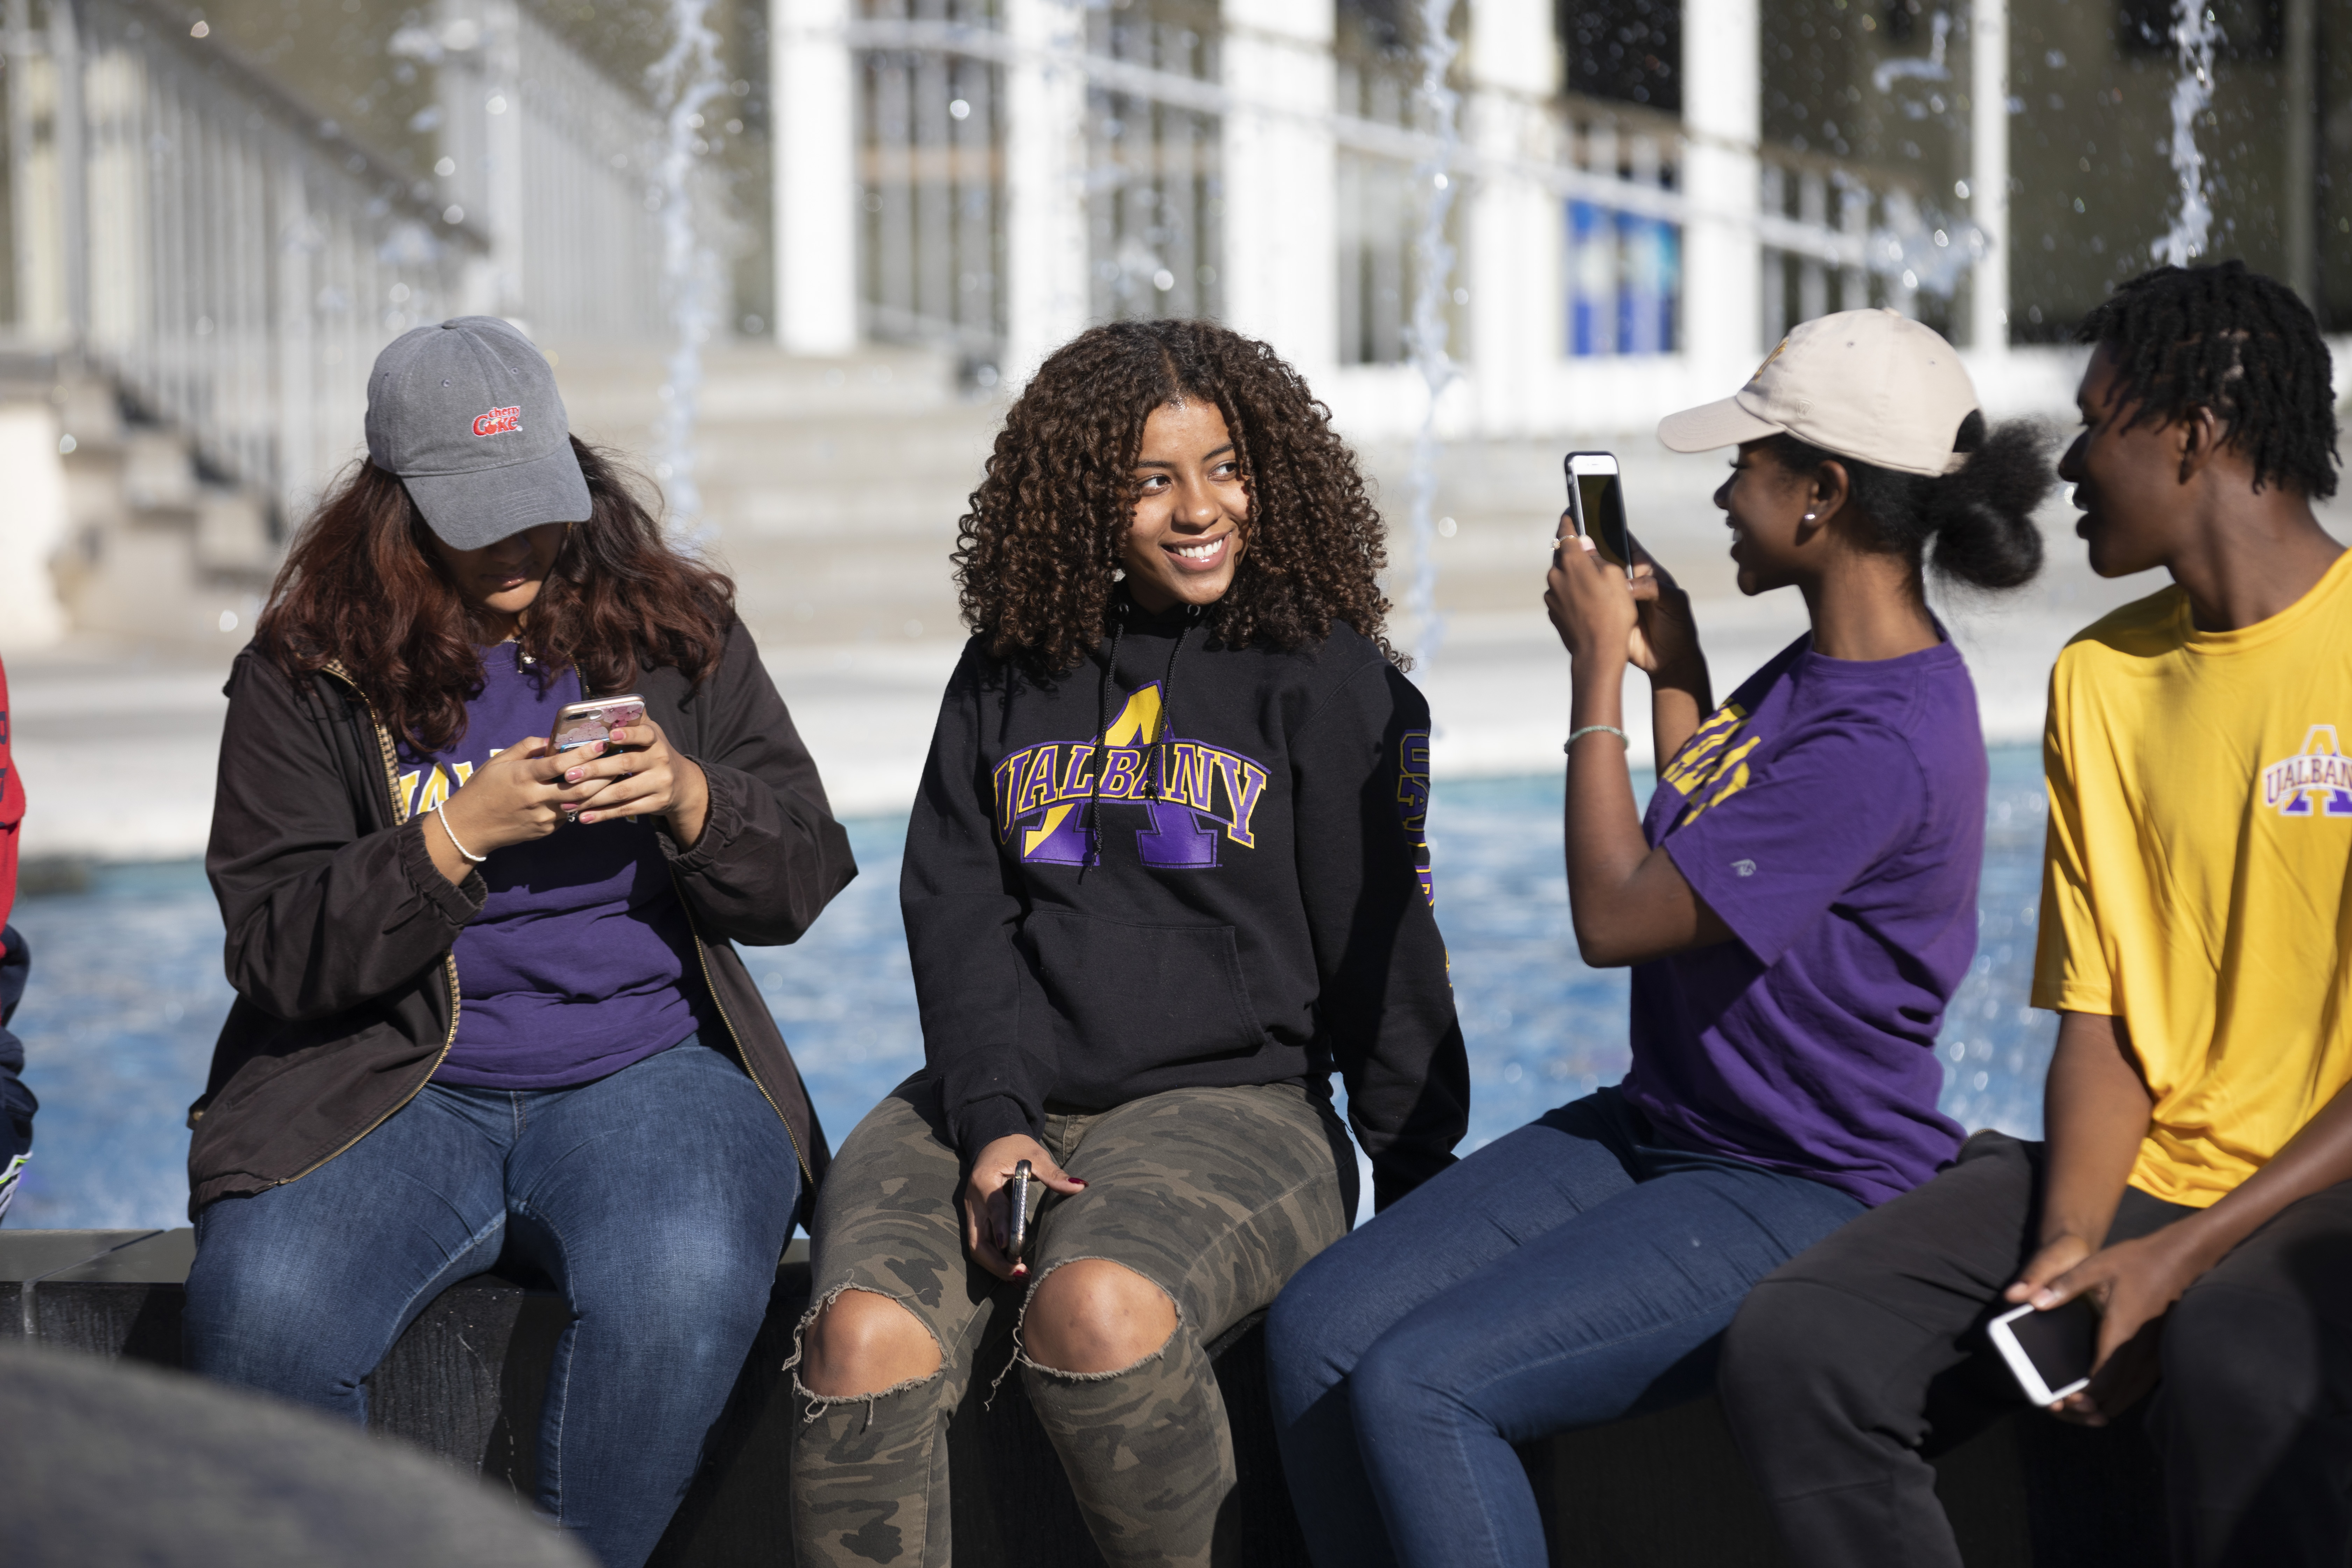 Four students sit on the edge of a fountain, one poses for a photo that the other is taking